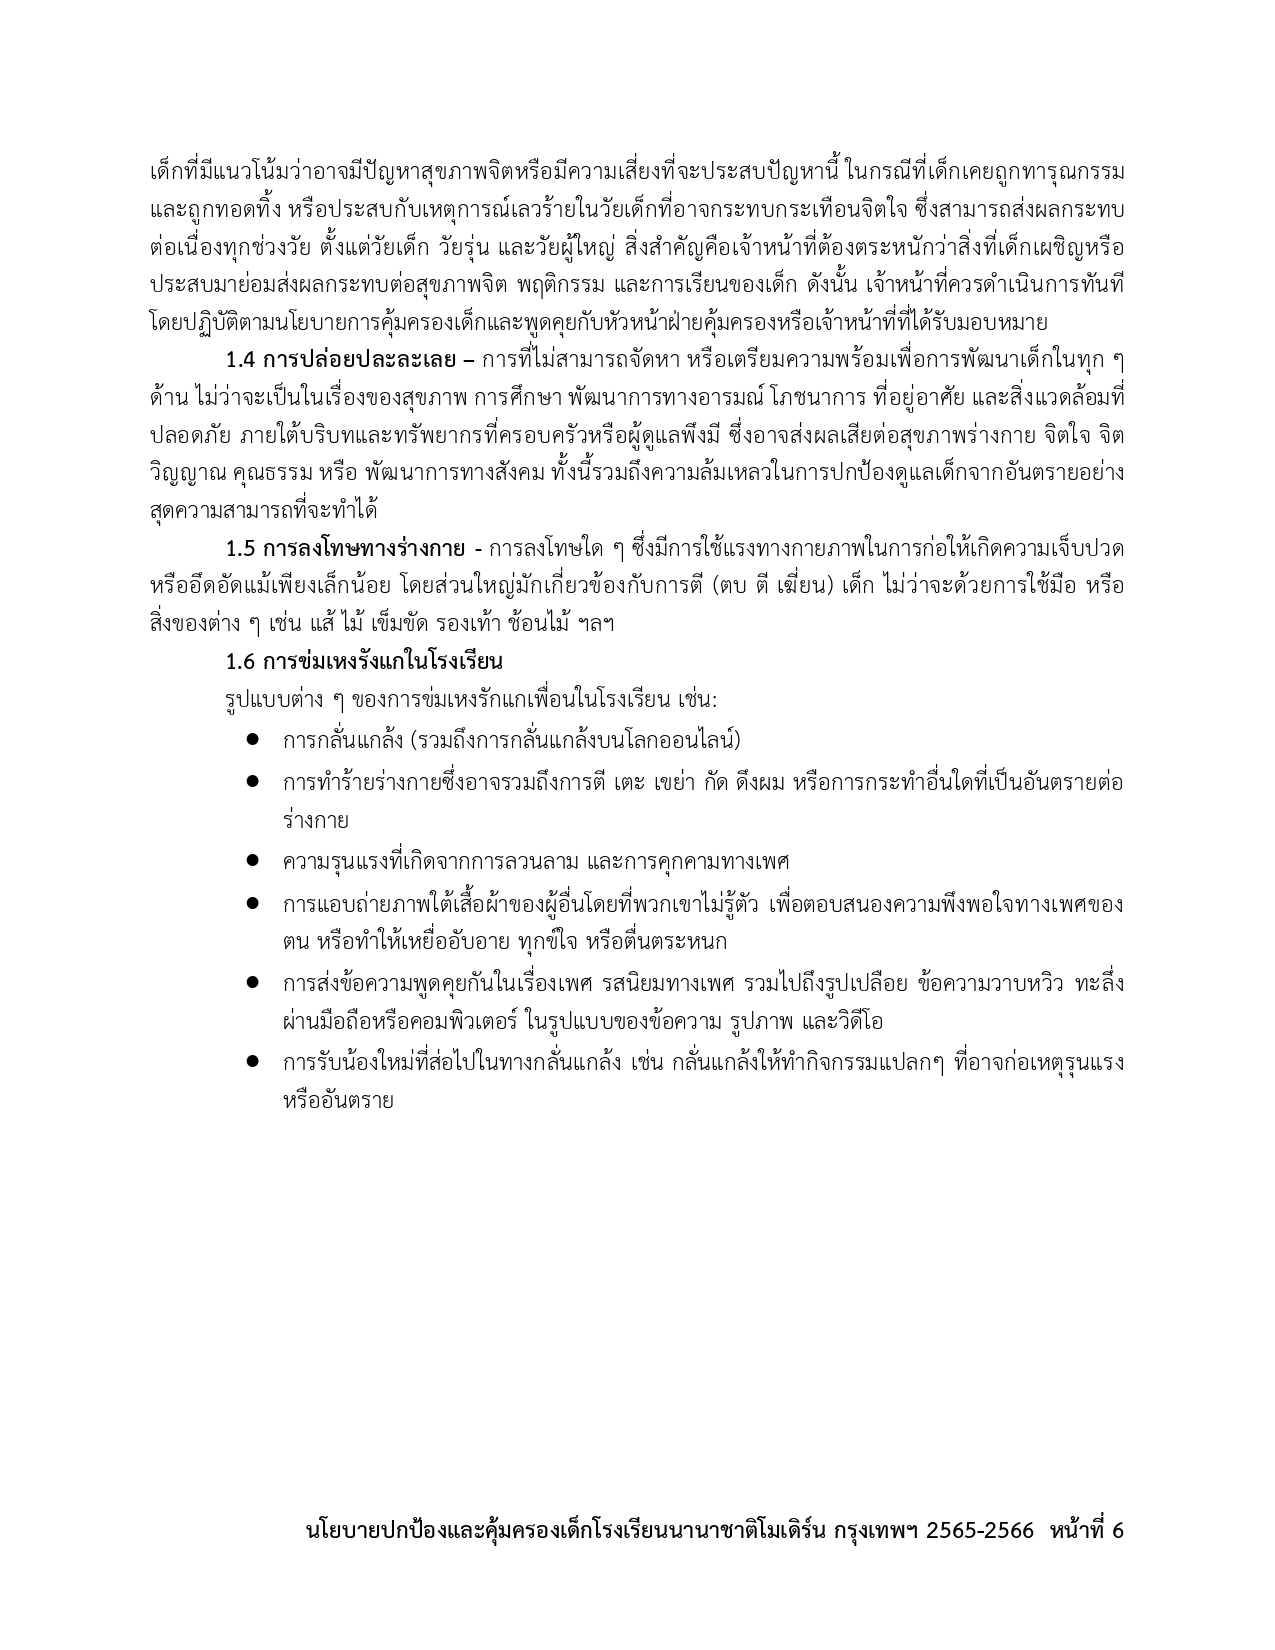 Child Protection Policy Thai Version page 0006